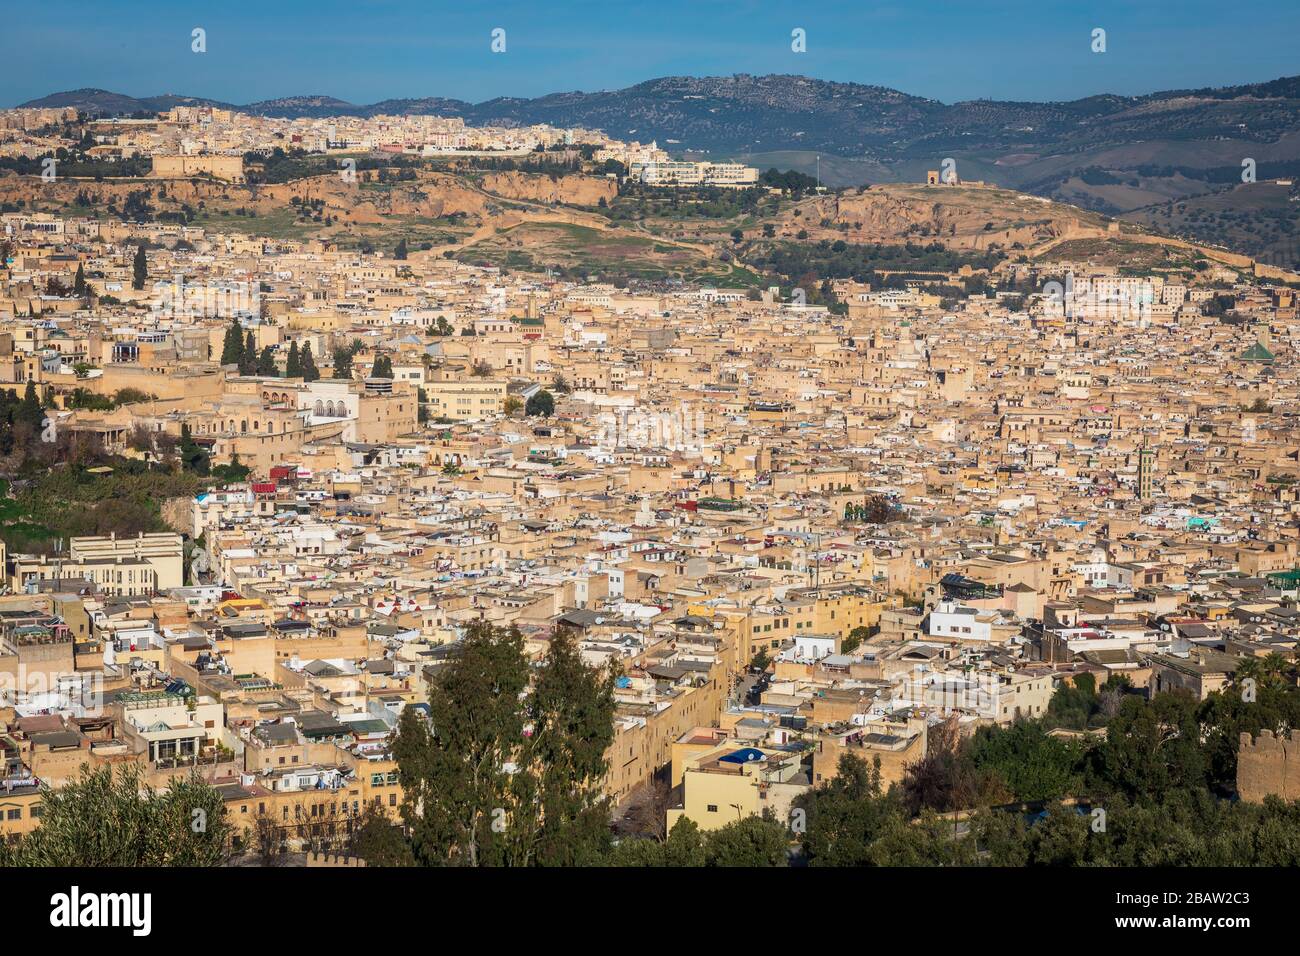 Looking down on Fes Medina, Fes, Morocco Stock Photo